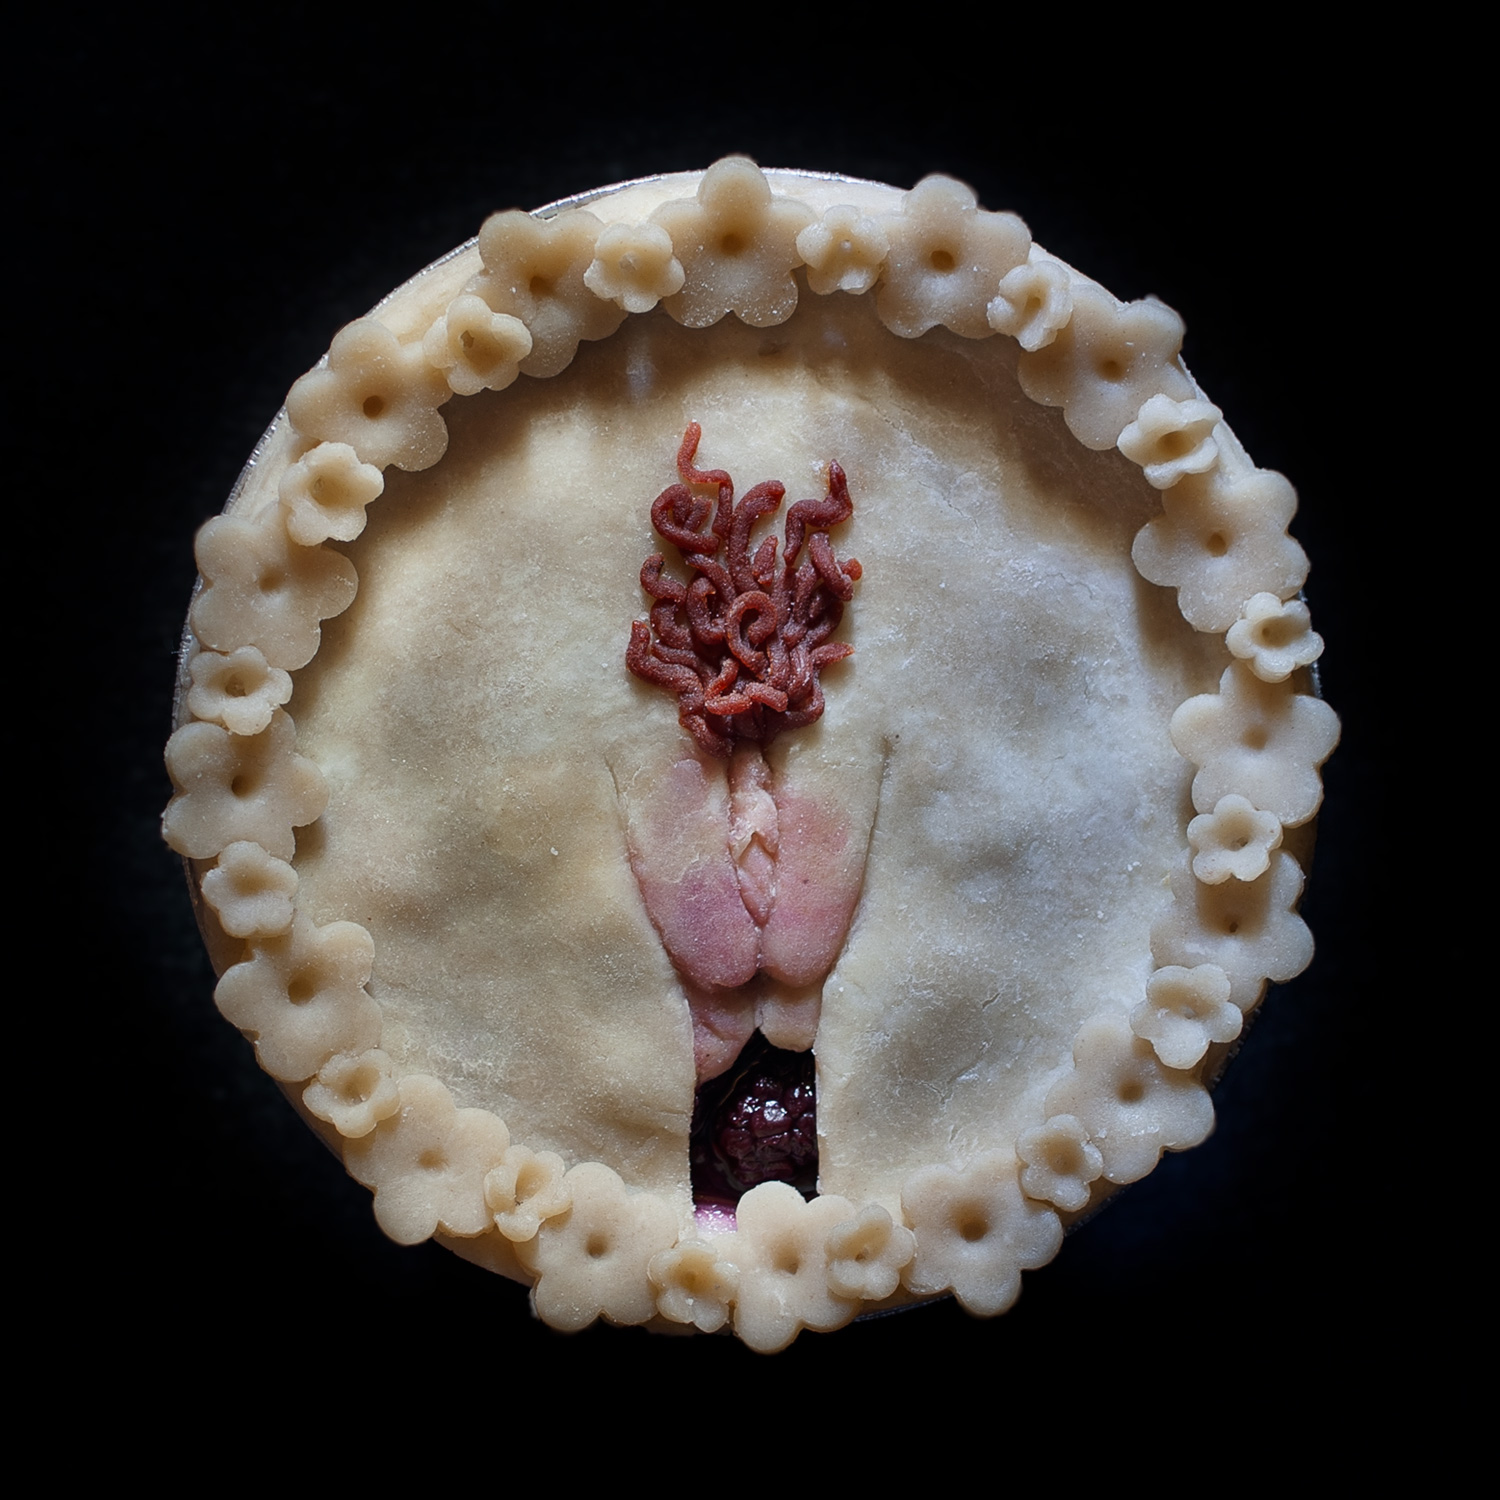 Unbaked six inch Cherry berry berry pie with hand sculpted pie crust art depicting a vulva with red pubic hair